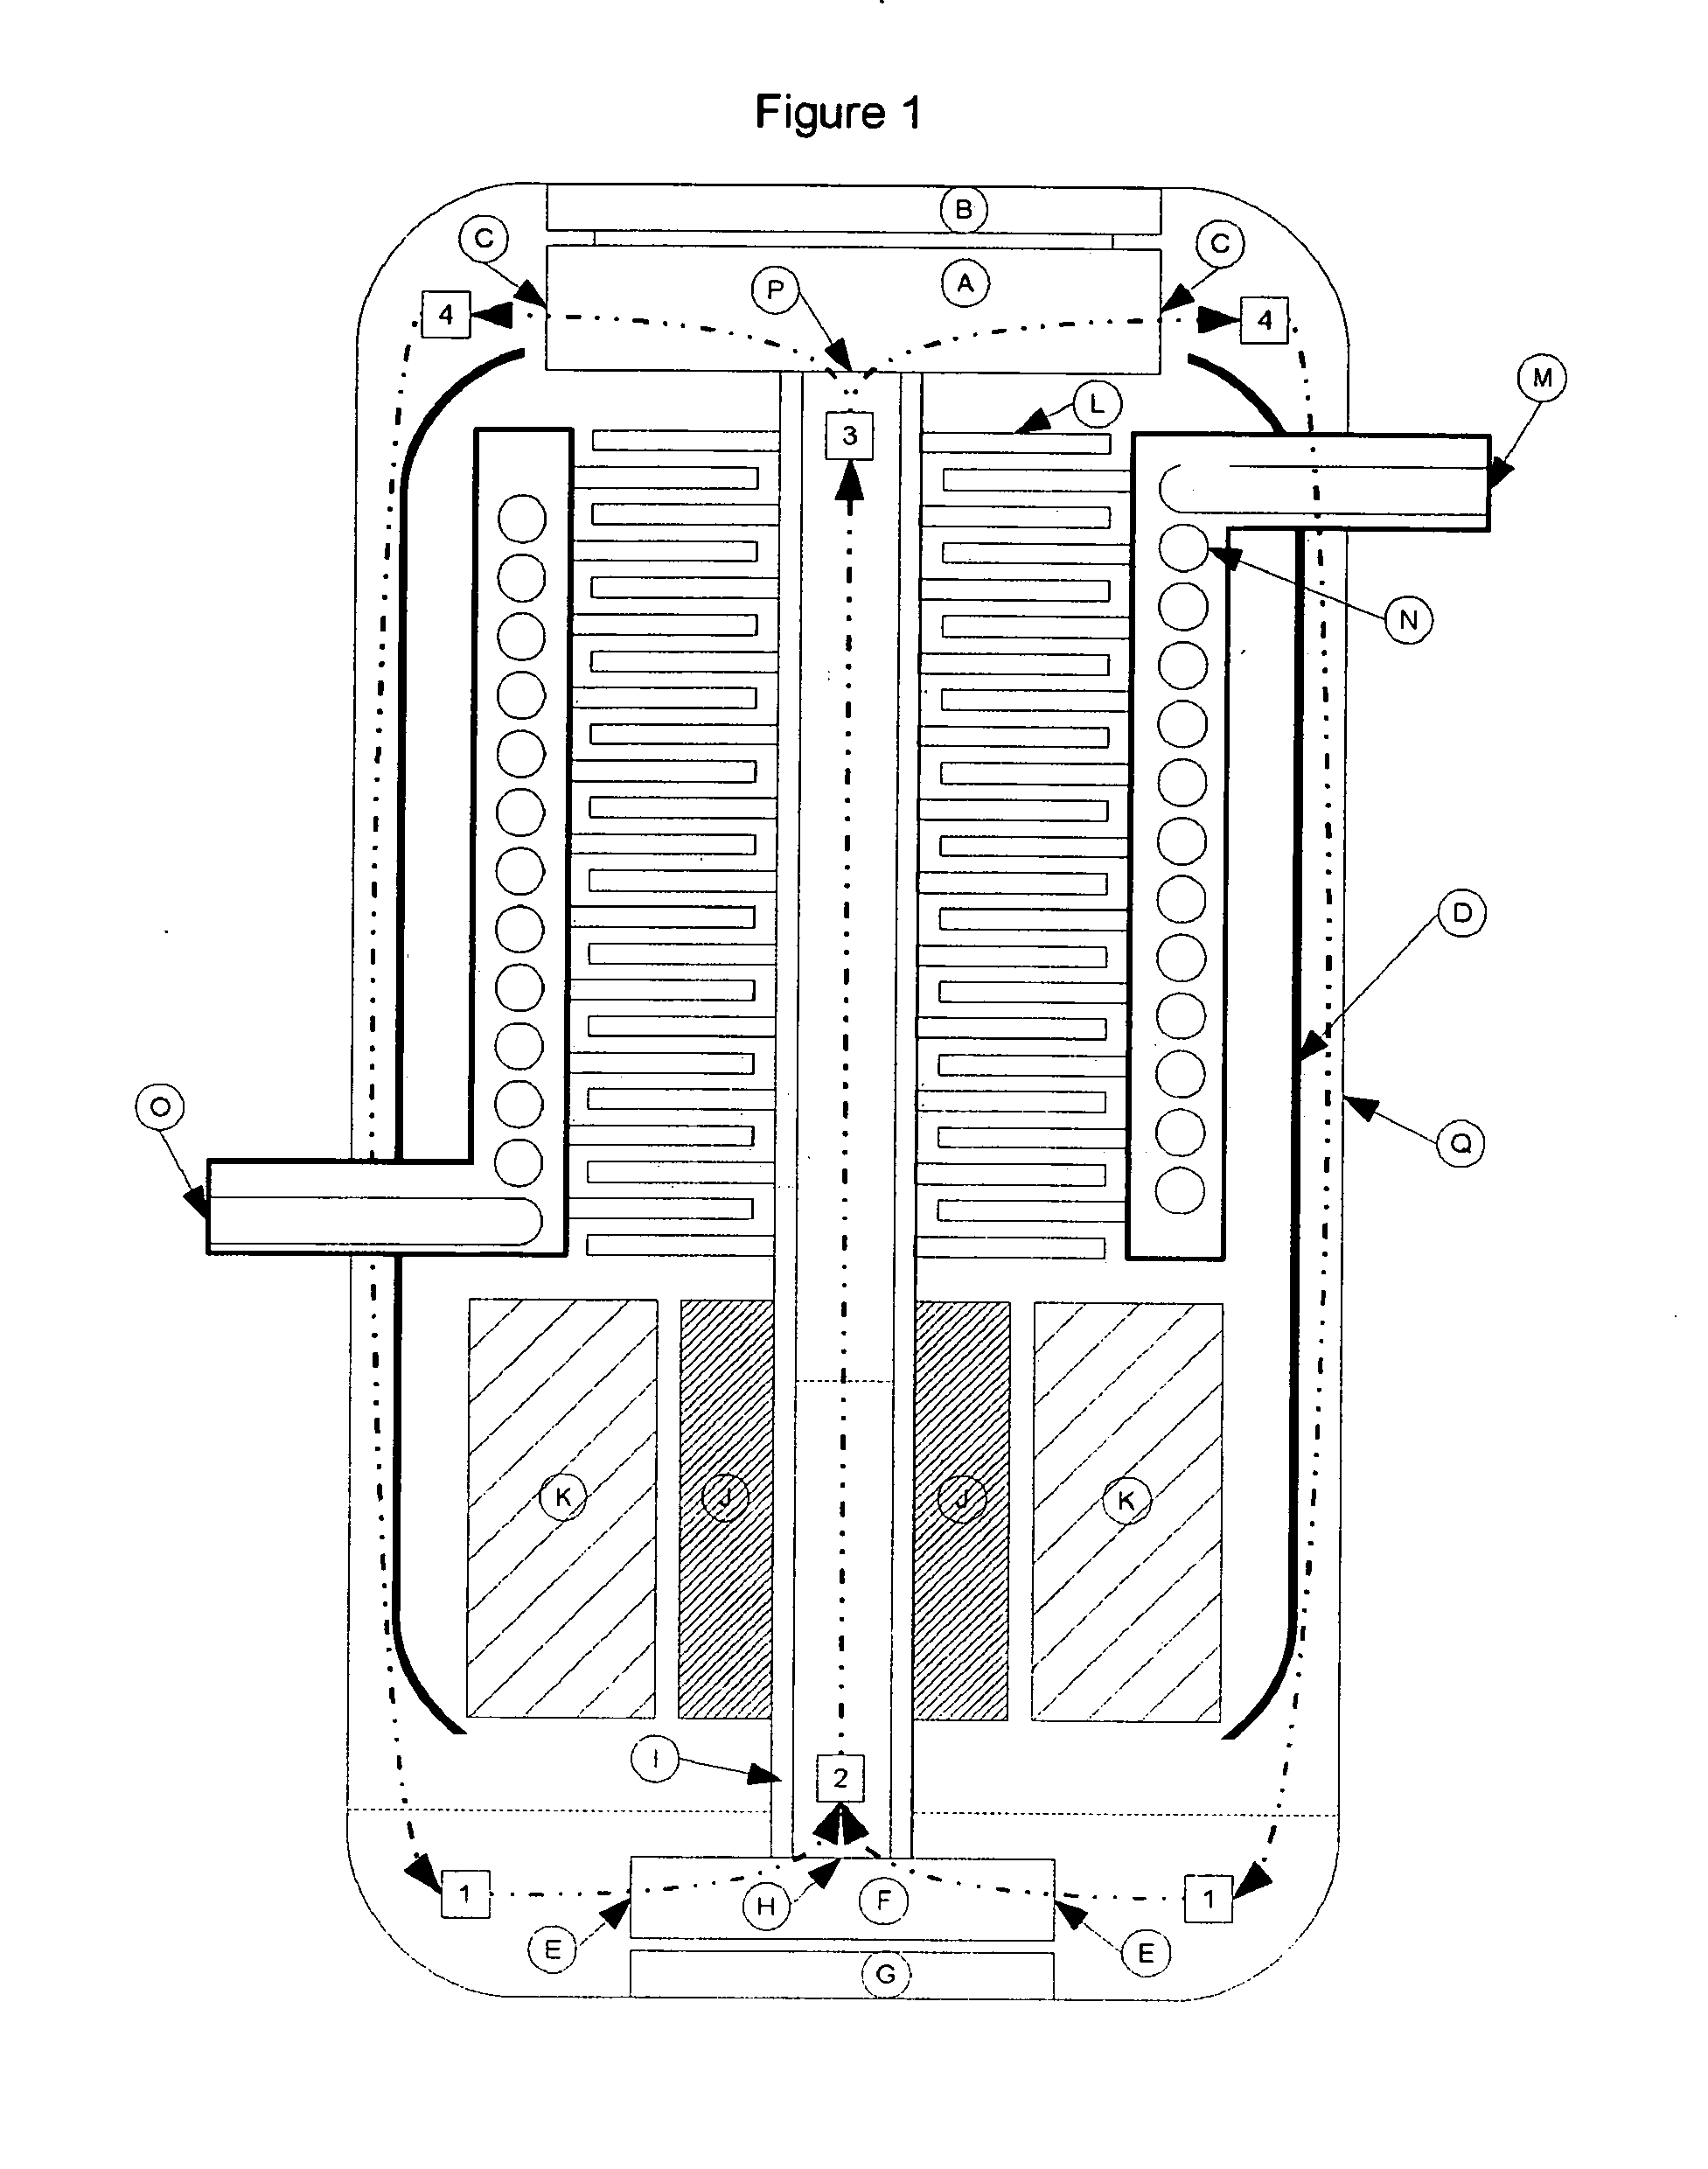 Compact energy cycle construction utilizing some combination of a scroll type expander, pump, and compressor for operating according to a rankine, an organic rankine, heat pump, or combined organic rankine and heat pump cycle